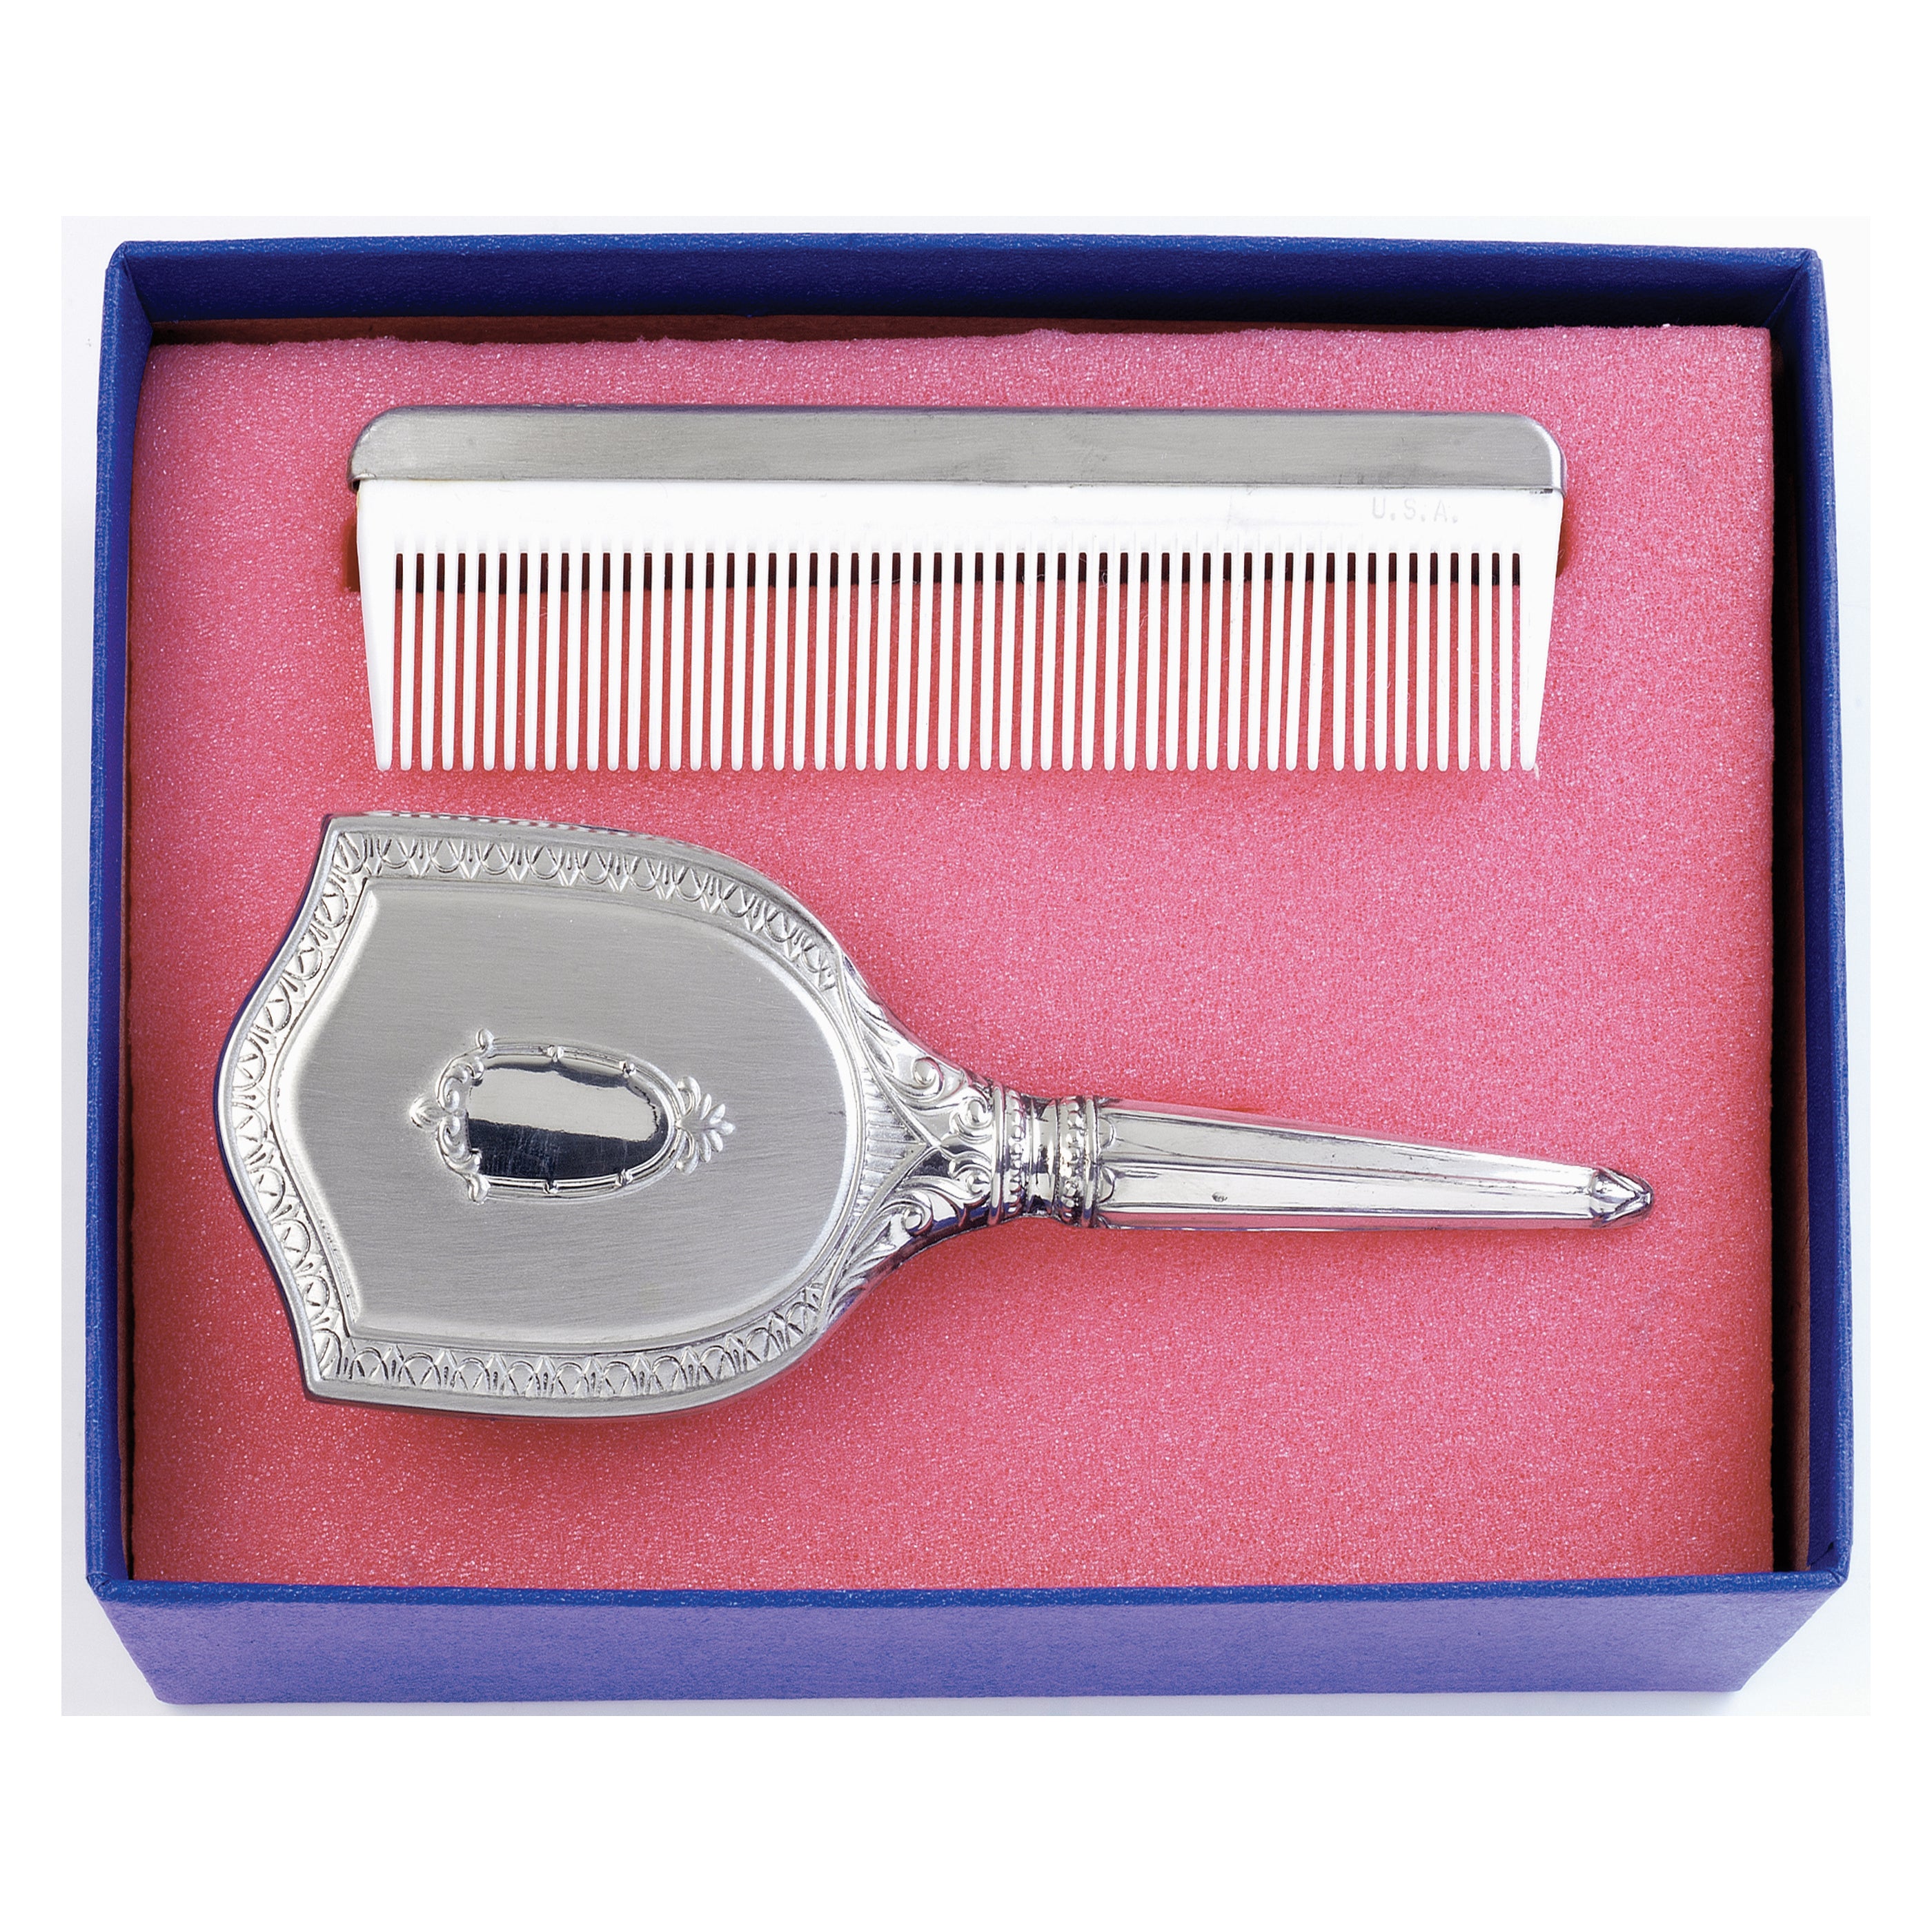 Girl's Embossed Brush and Comb Set